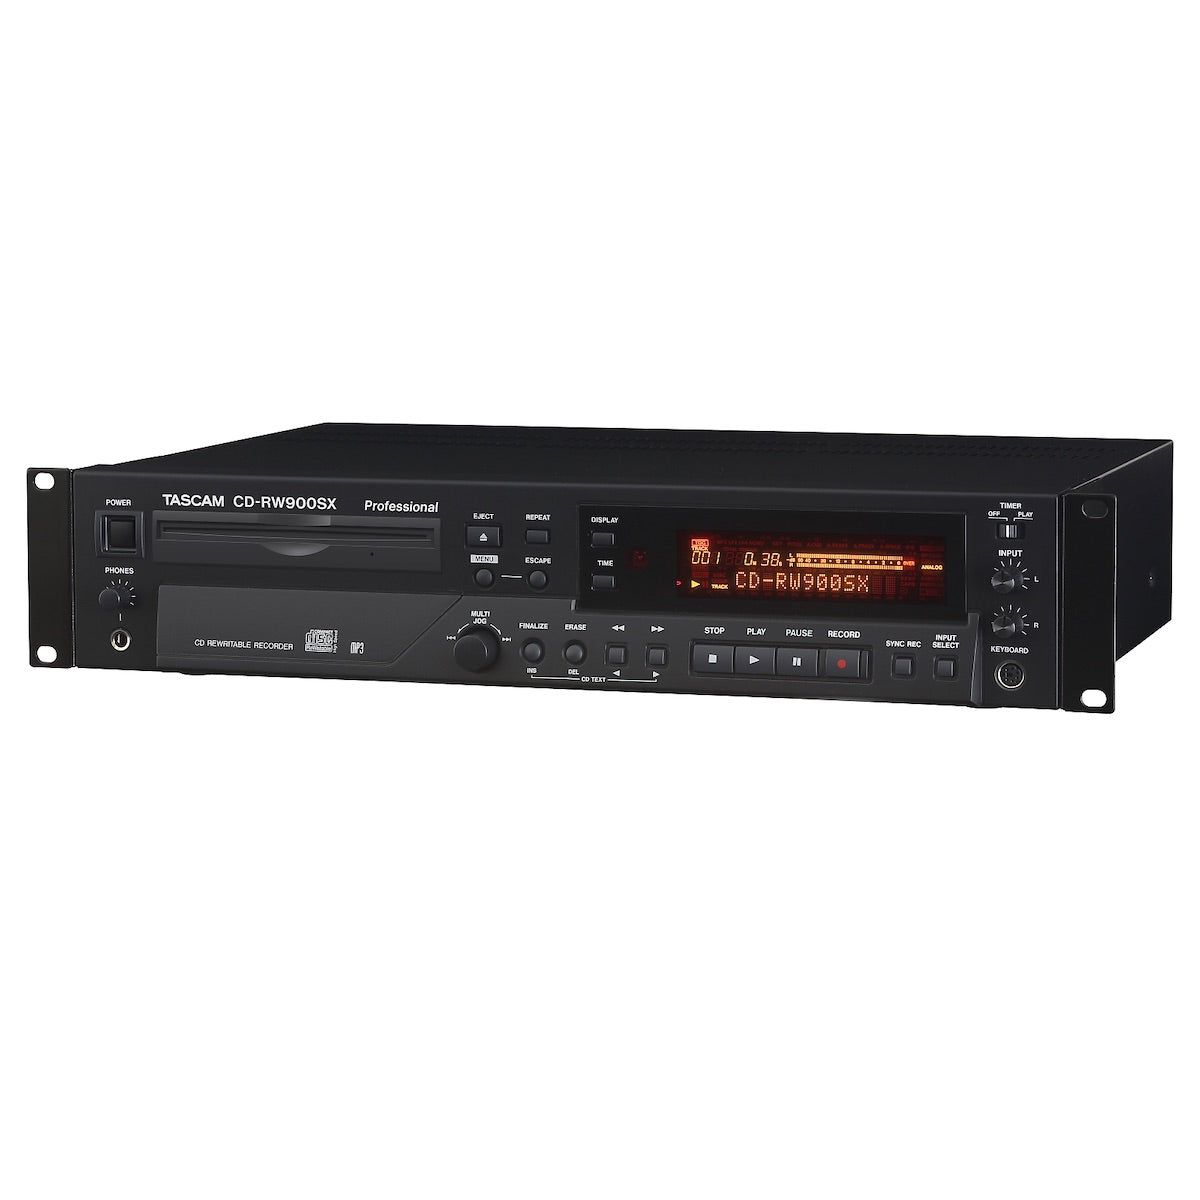 Tascam CD-RW900SX - Professional CD Recorder/Player, left angled view